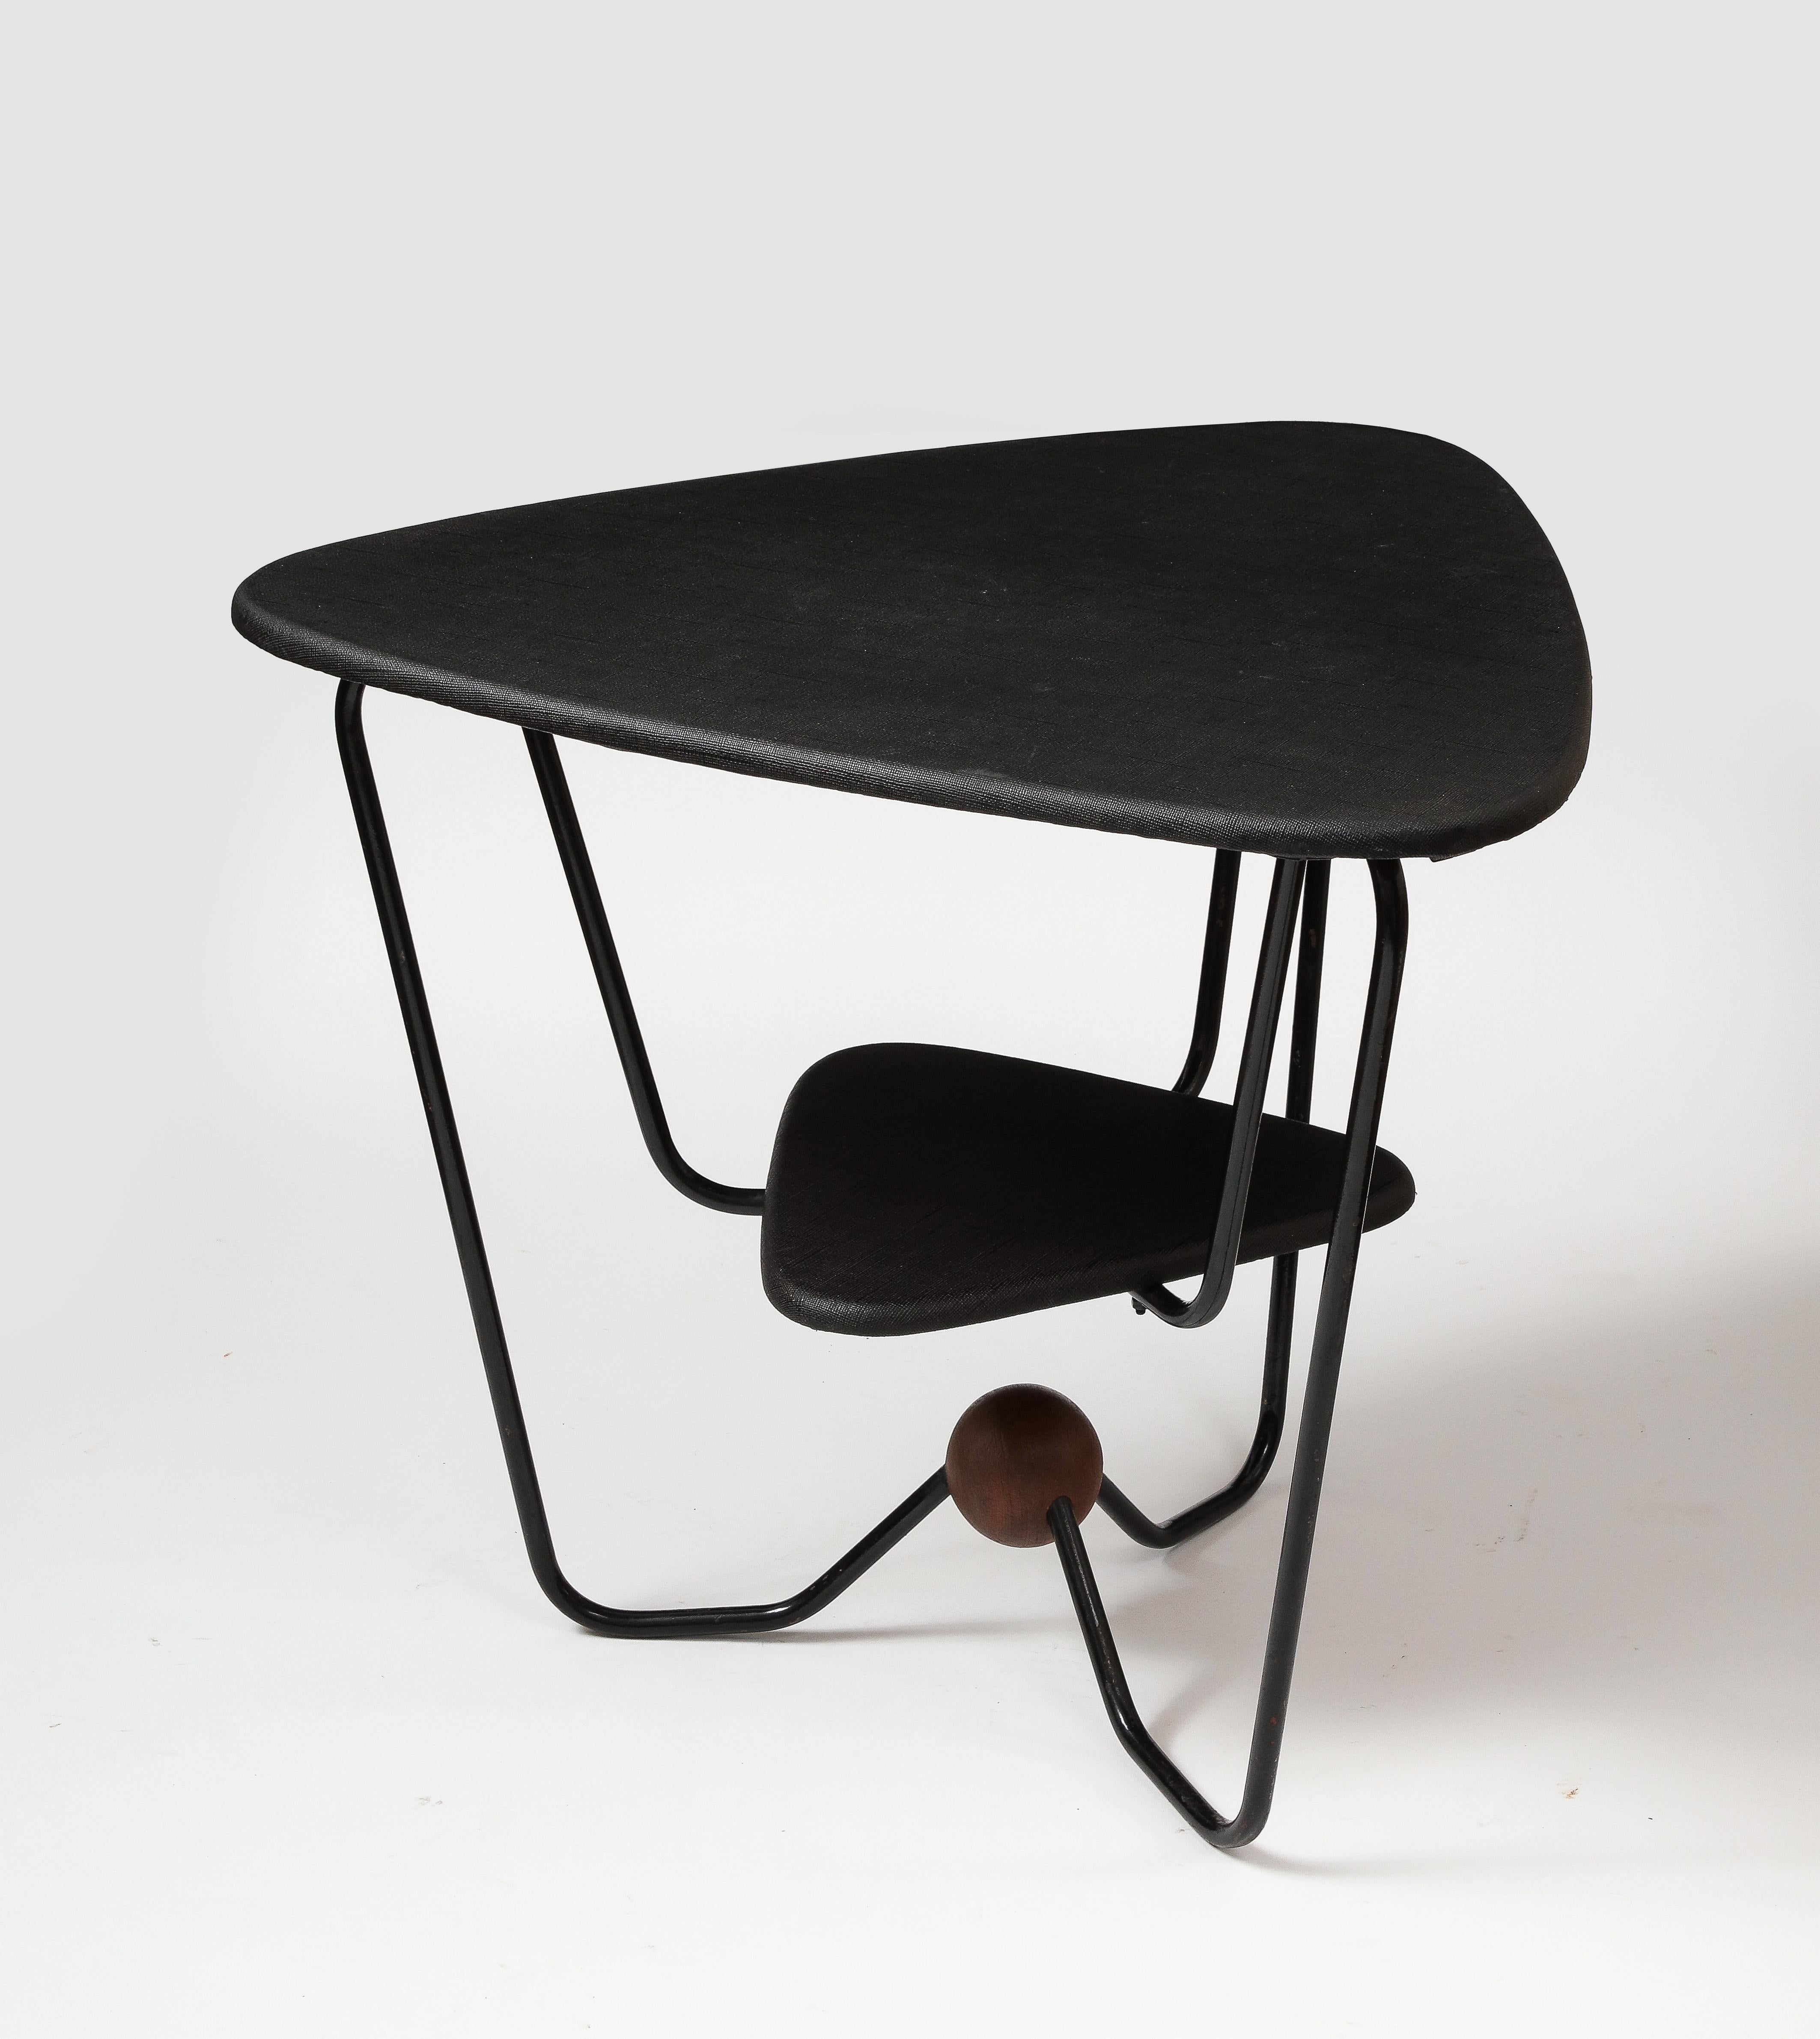 20th Century Triangular Steel, Walnut, and Textile Side Table, Italy, c. 1960 For Sale